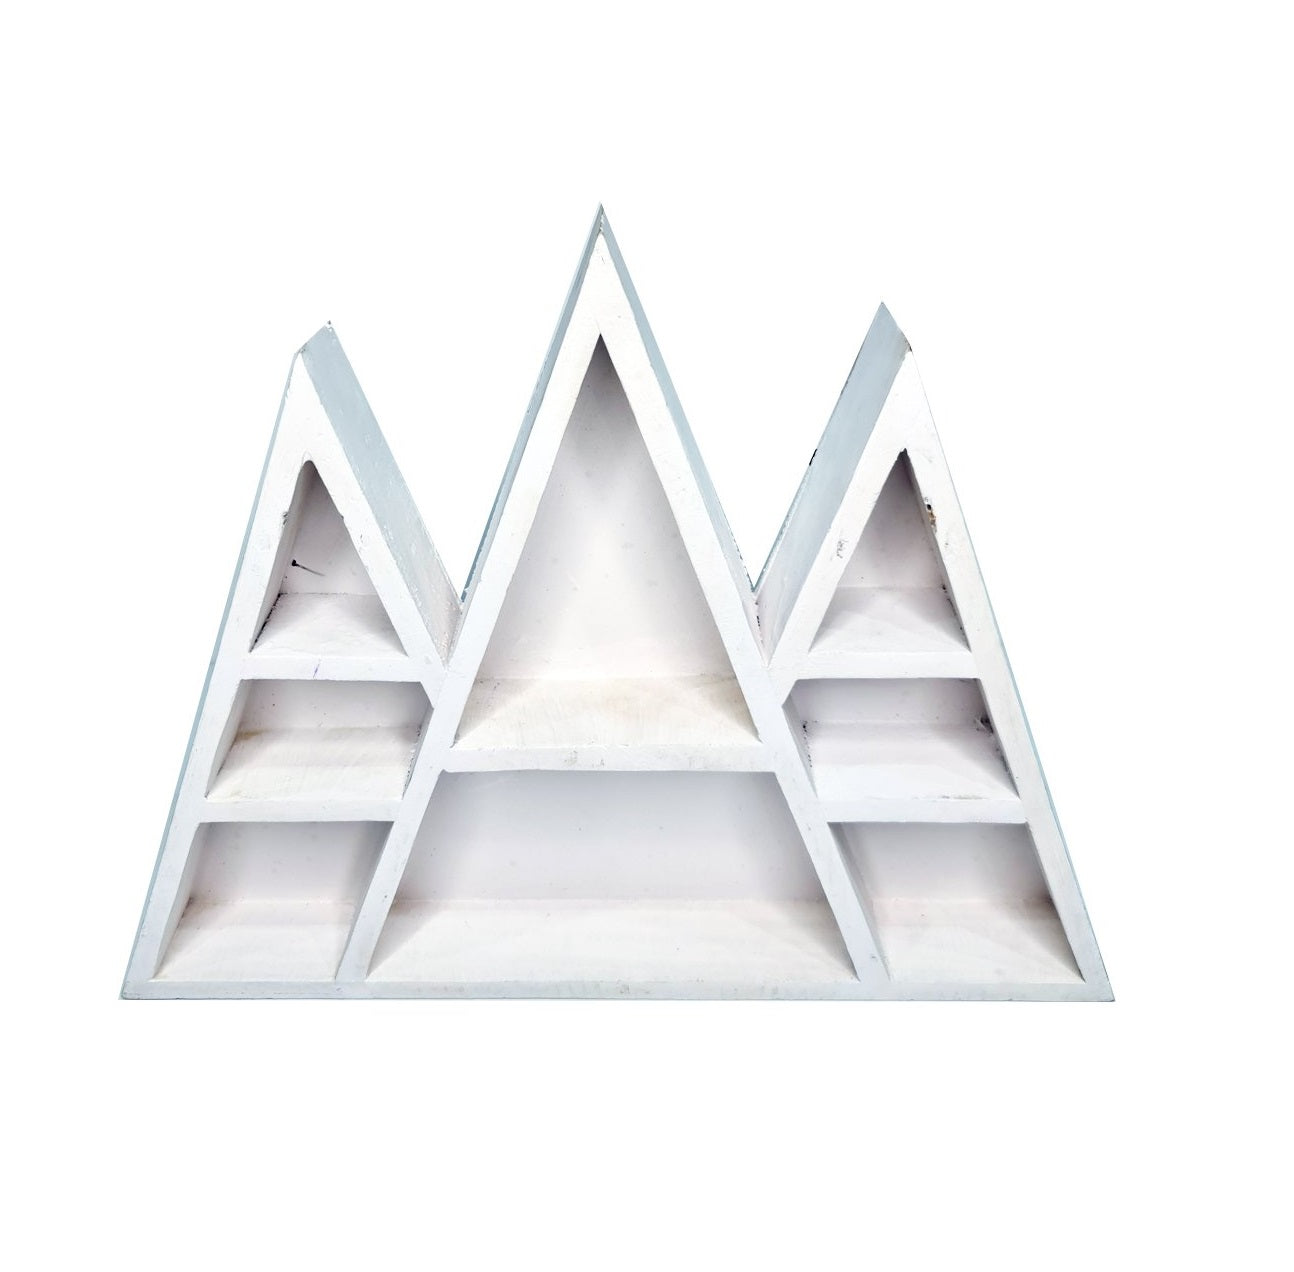 Pyramid Wooden Wall Panel Storage Crystal Rustic Home Decor - White